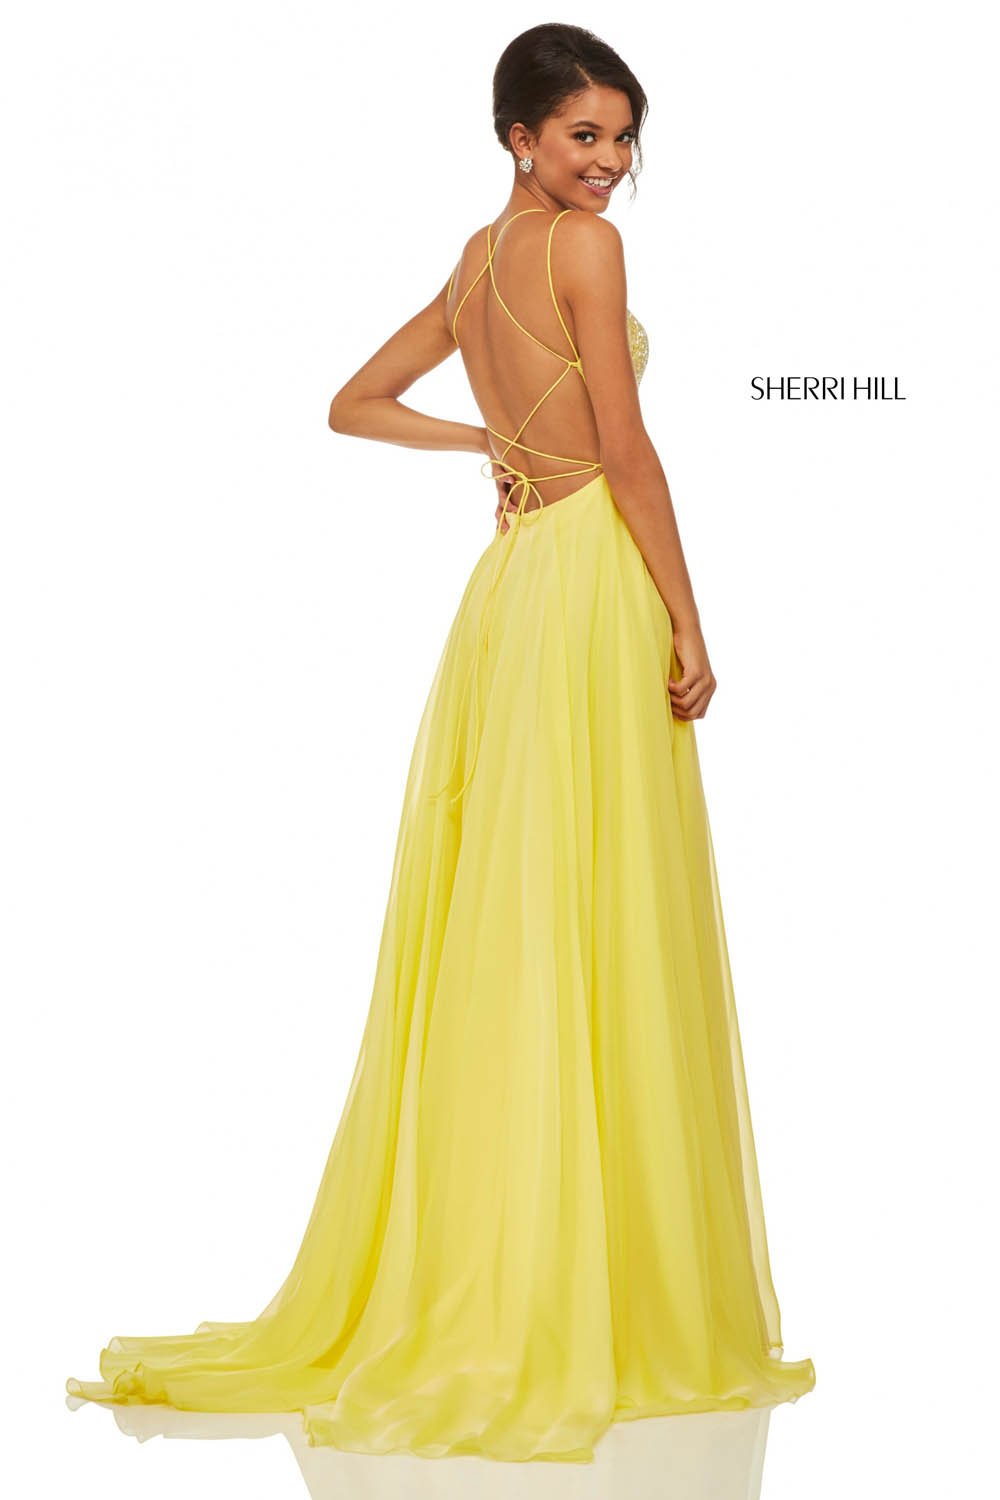 Sherri Hill 52591 dress images in these colors: Blue, Periwinkle, Yellow, Light Green, Pink, Nude.